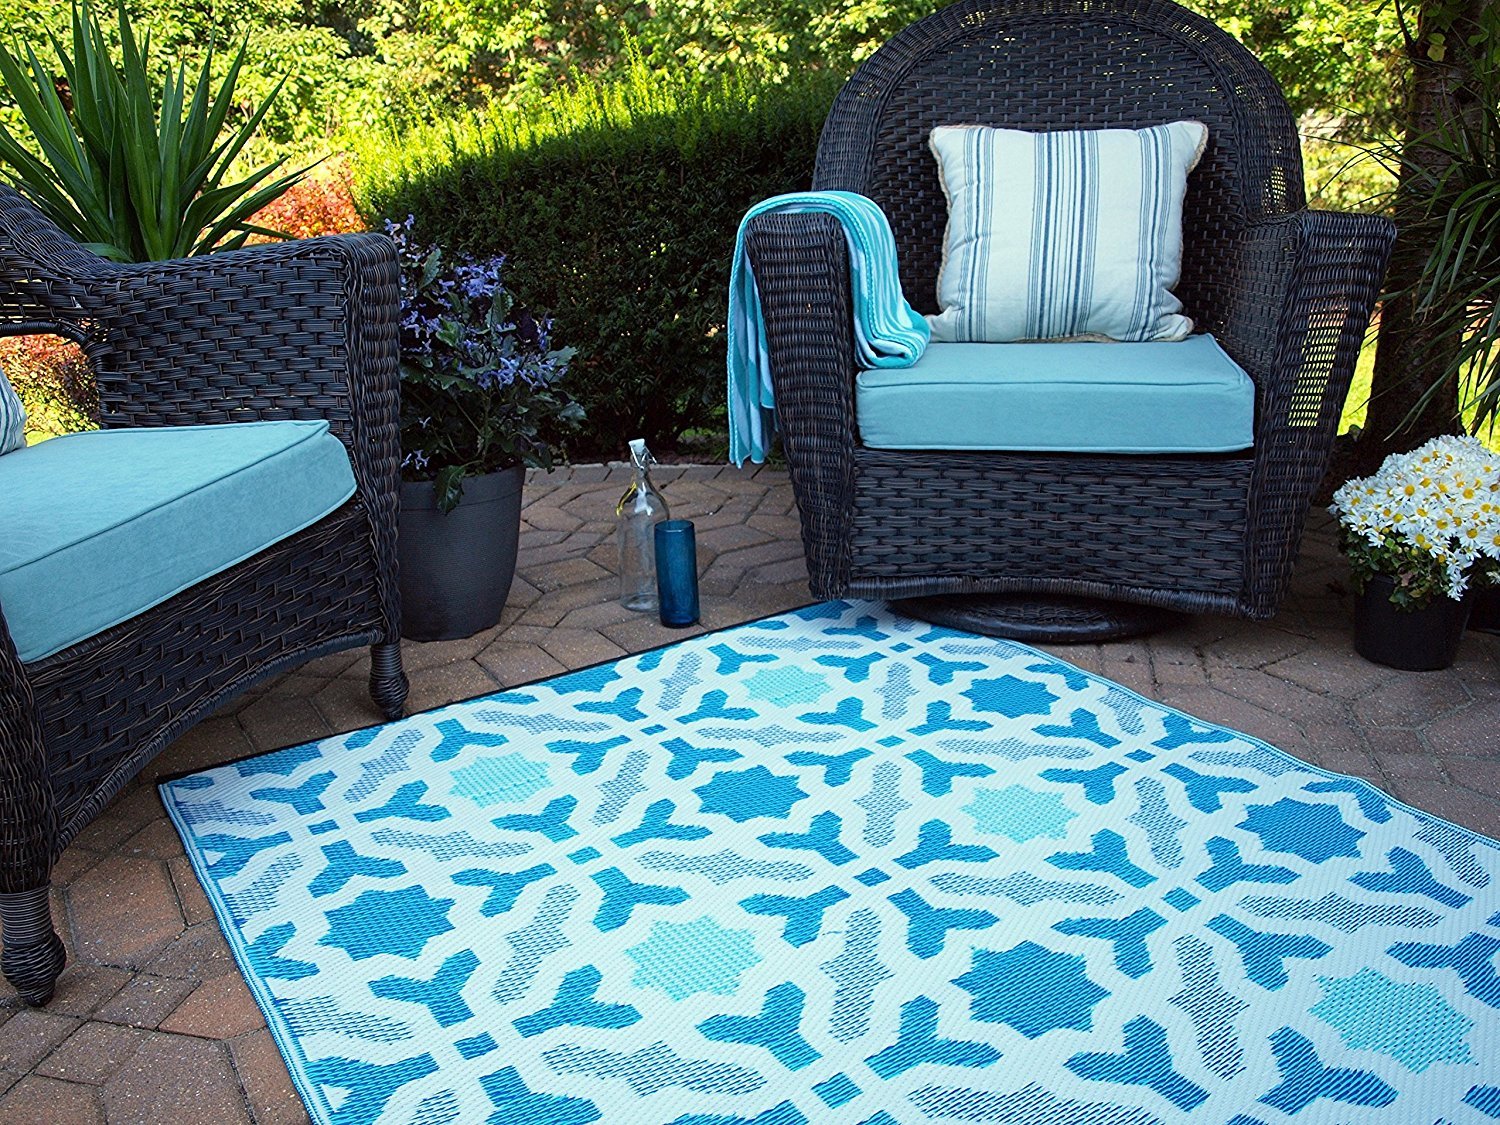 Favorite Home decor finds- outdoor rugs!